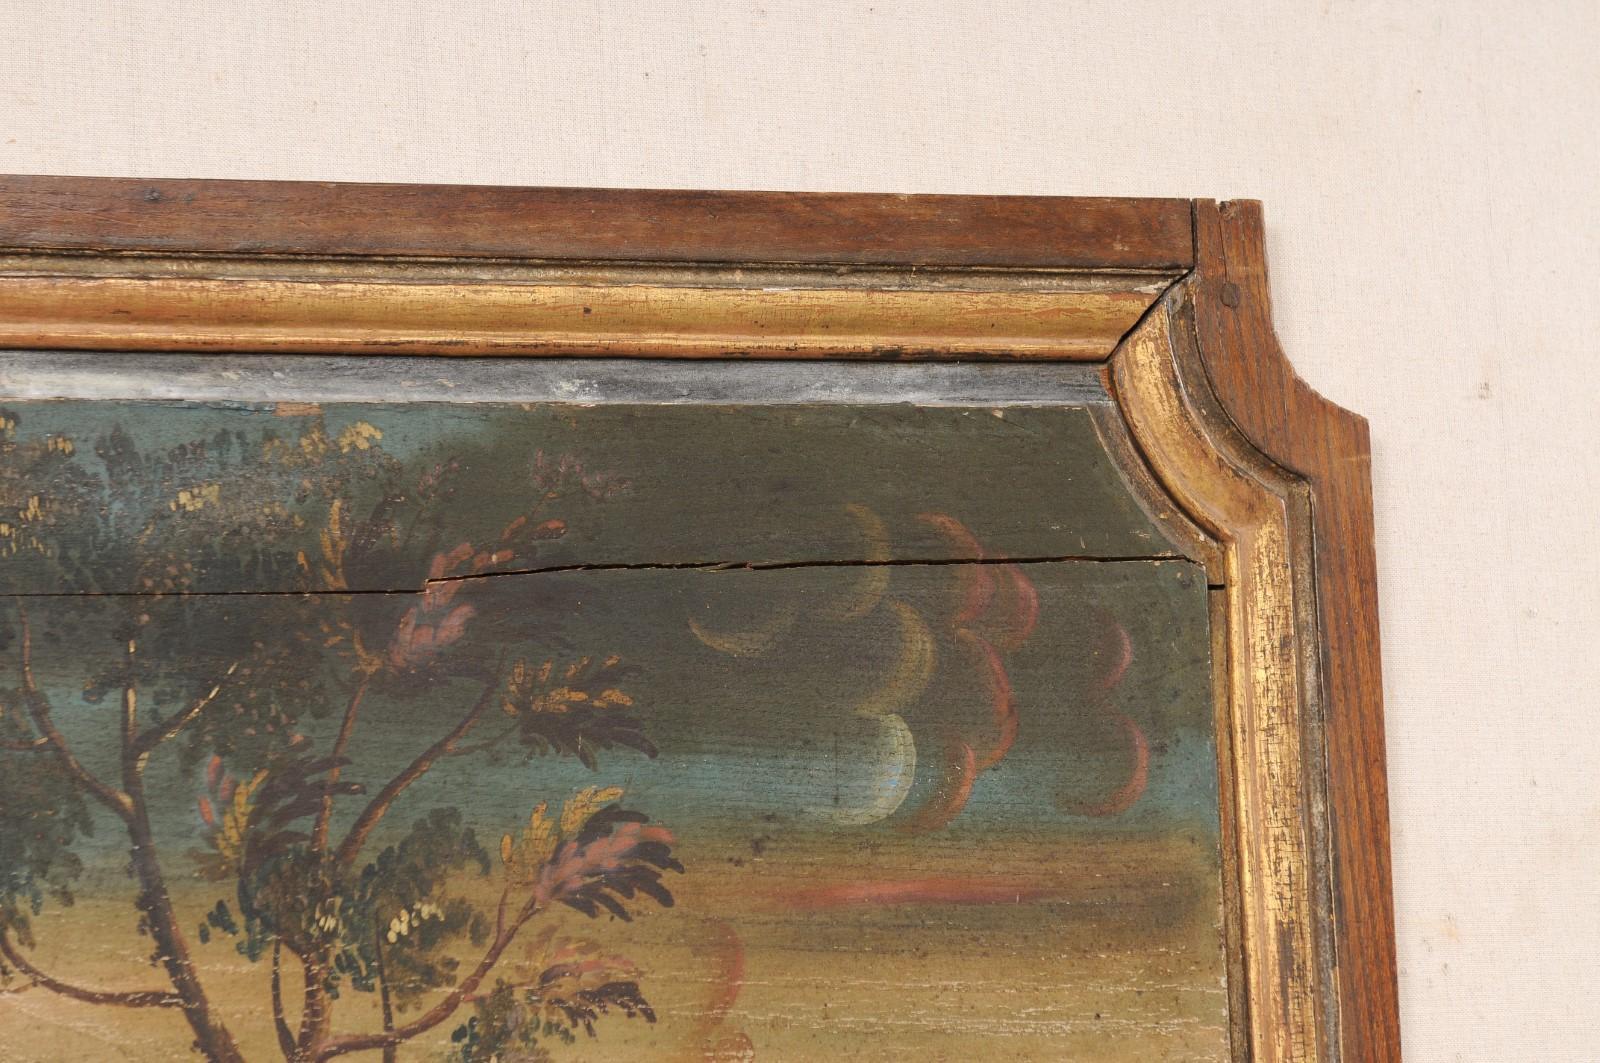 19th C. French Landscape & Figures Painting on Wooden Plaque (4+ Ft Wide) For Sale 7